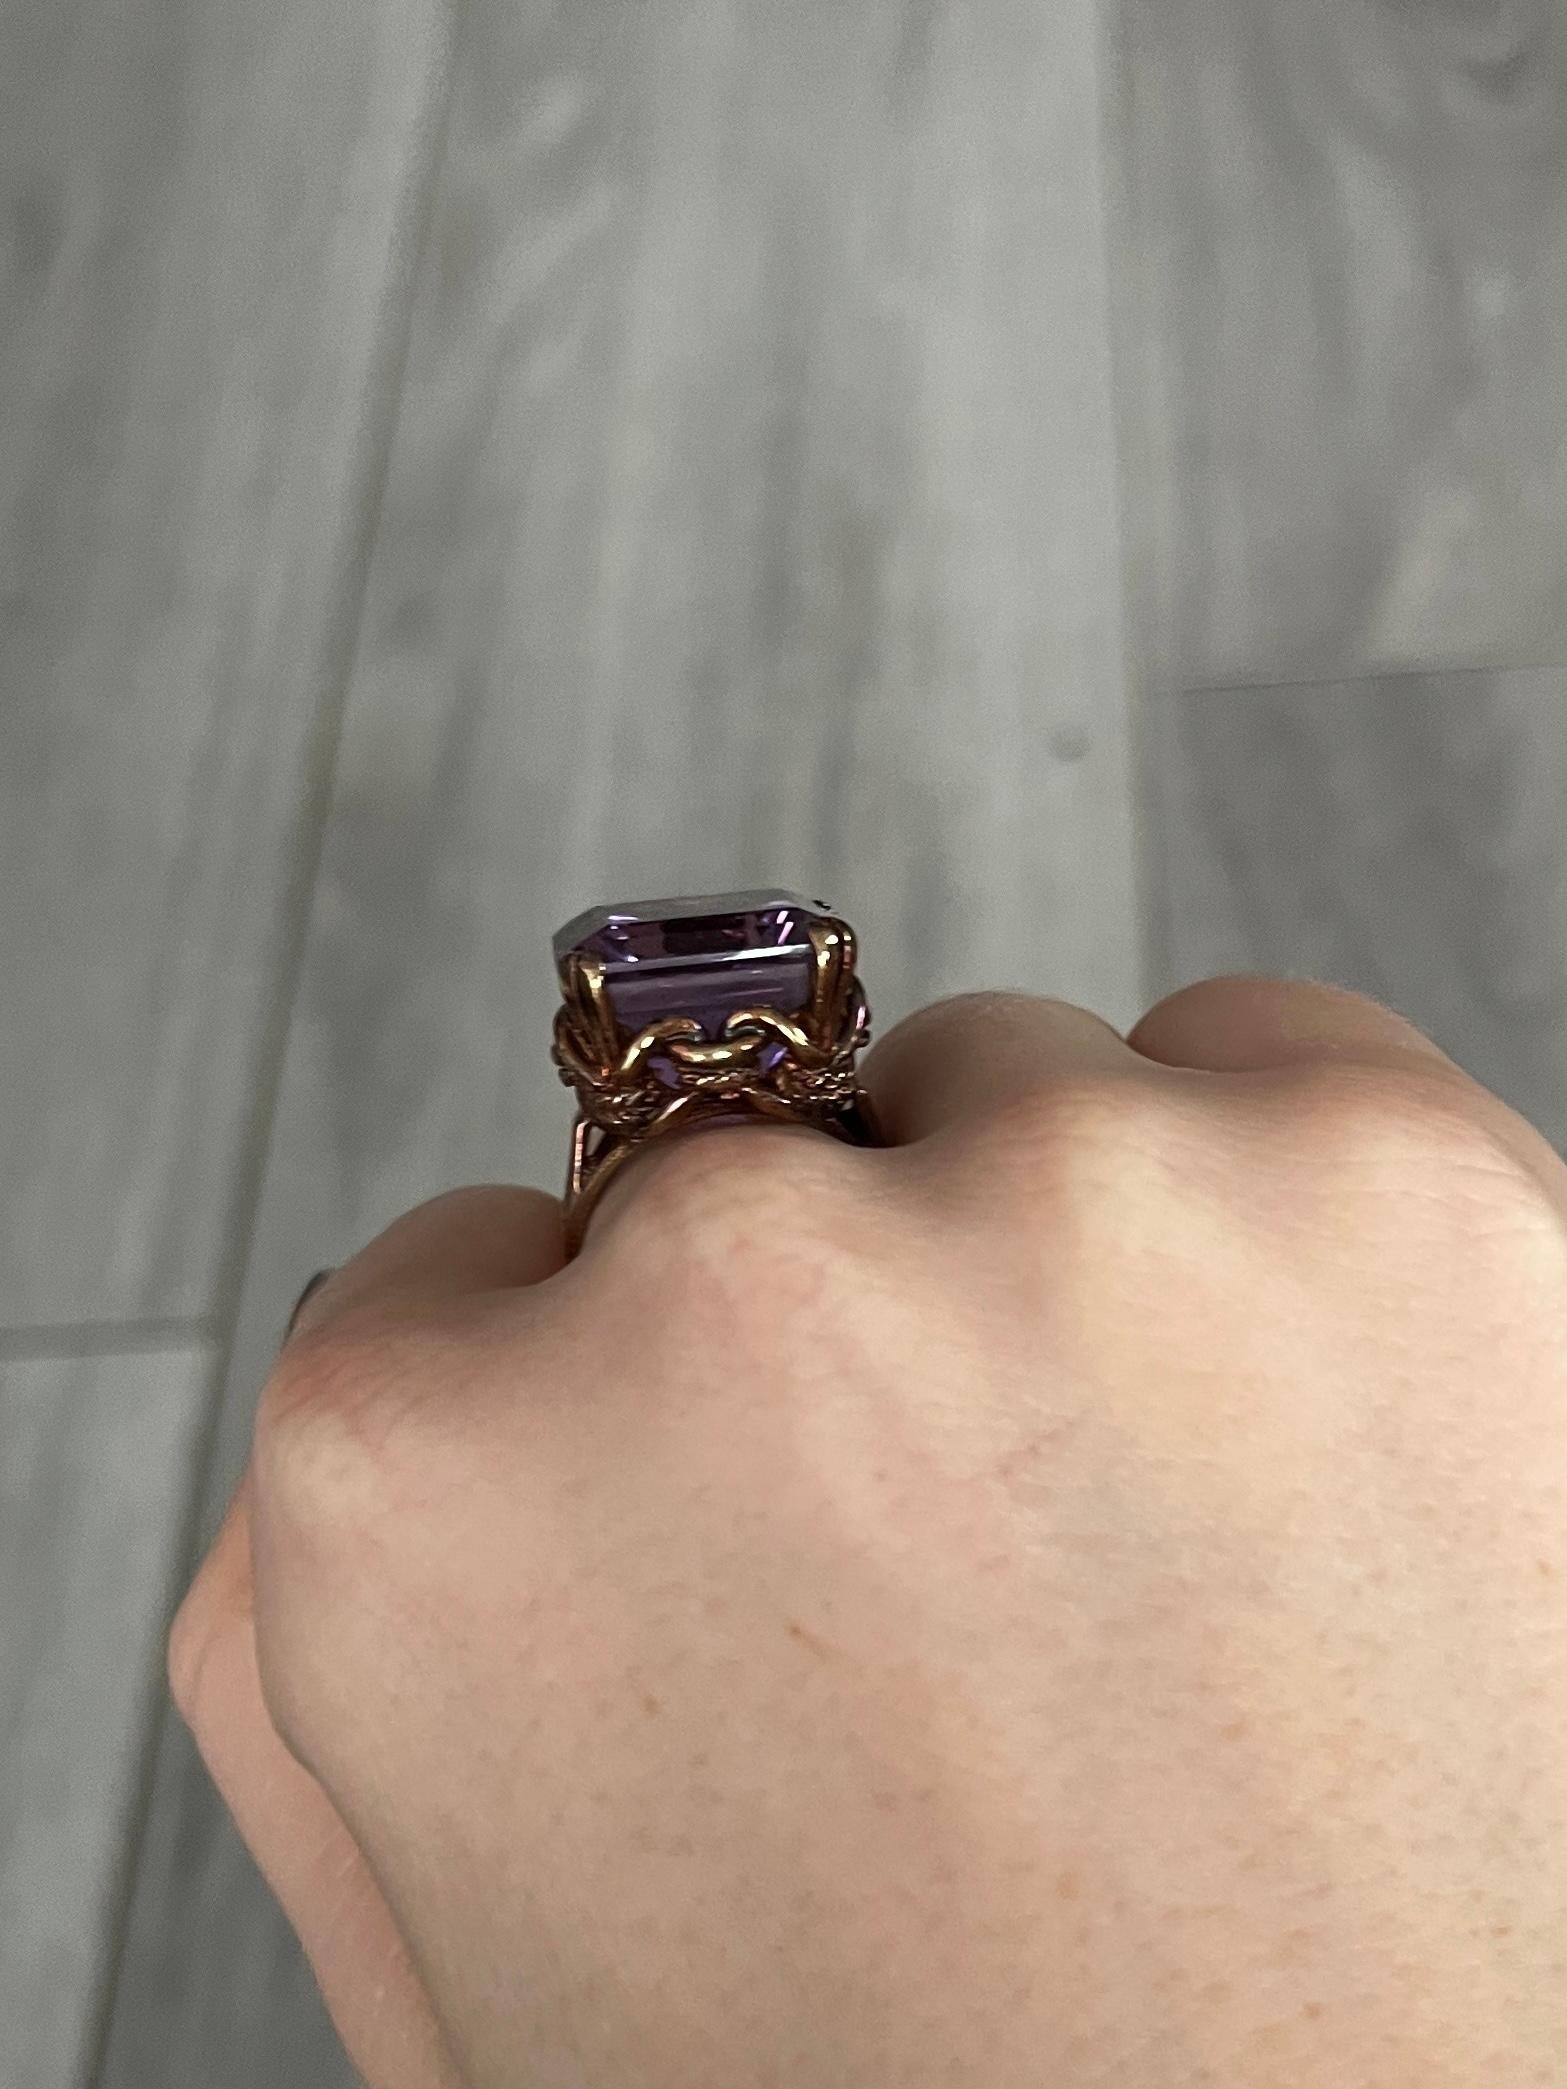 The amethyst set up high upon this ring is a gorgeous purple colour held in simple claws. Modelled in 9carat gold and has an ornate open work gallery. fully hallmarked London 1959.

Ring Size: N or 6 3/4
Stone Dimensions: 16x16mm 
Height Off Finger: